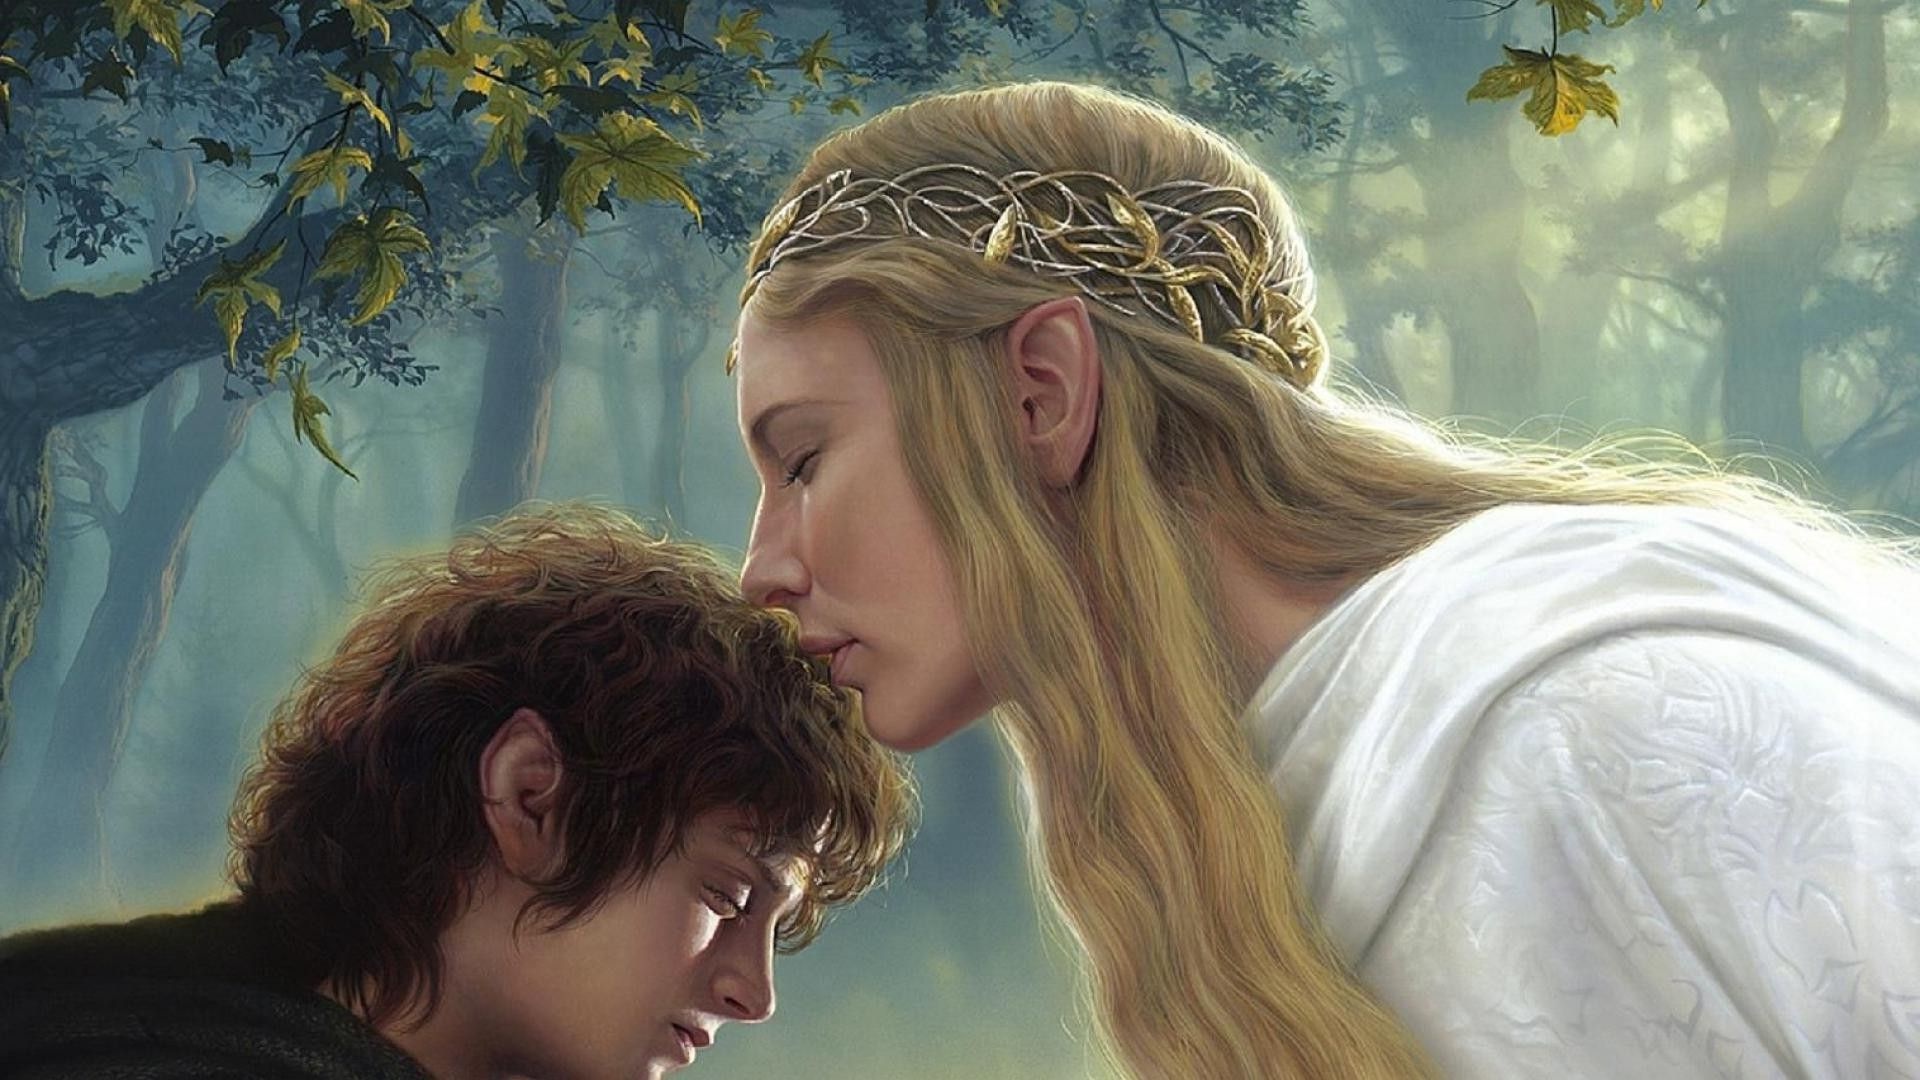 Galadriel: The only daughter and youngest child of Finarfin, prince of the Noldor, and Earwen, Frodo Baggins. 1920x1080 Full HD Wallpaper.